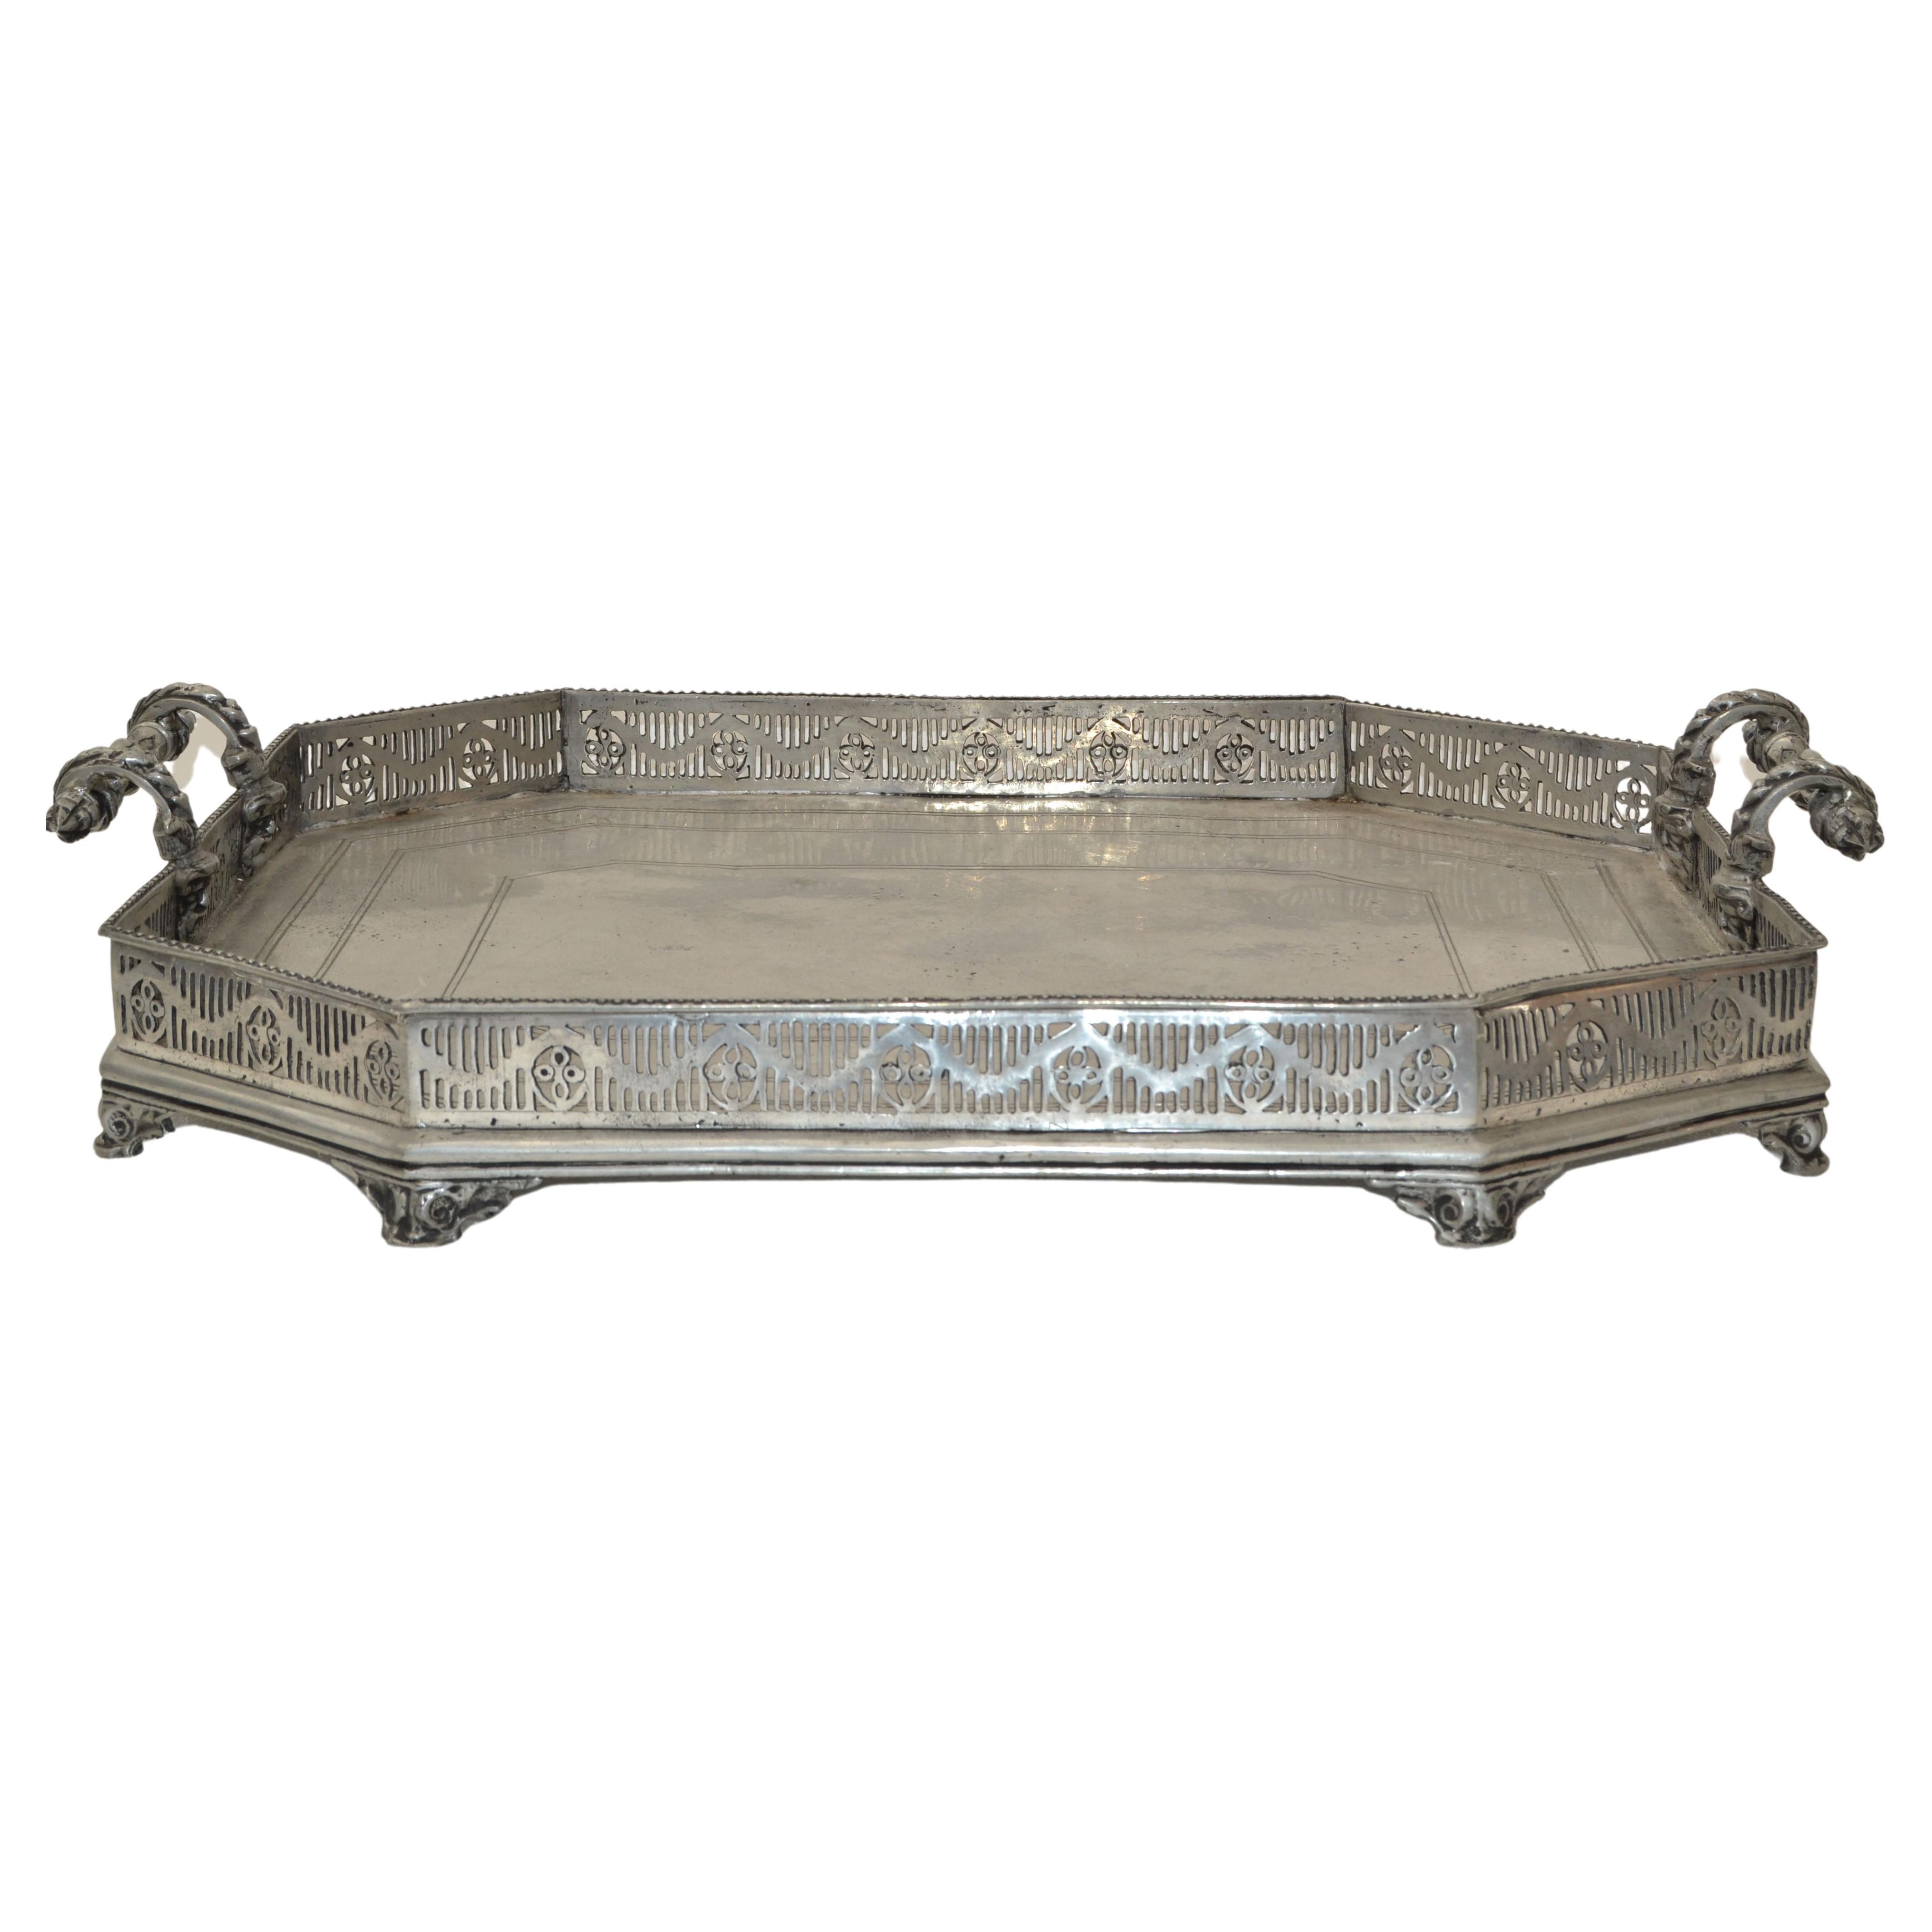 Spanish Silver Ornate Large Footed Serving Tray with Handles Trademark